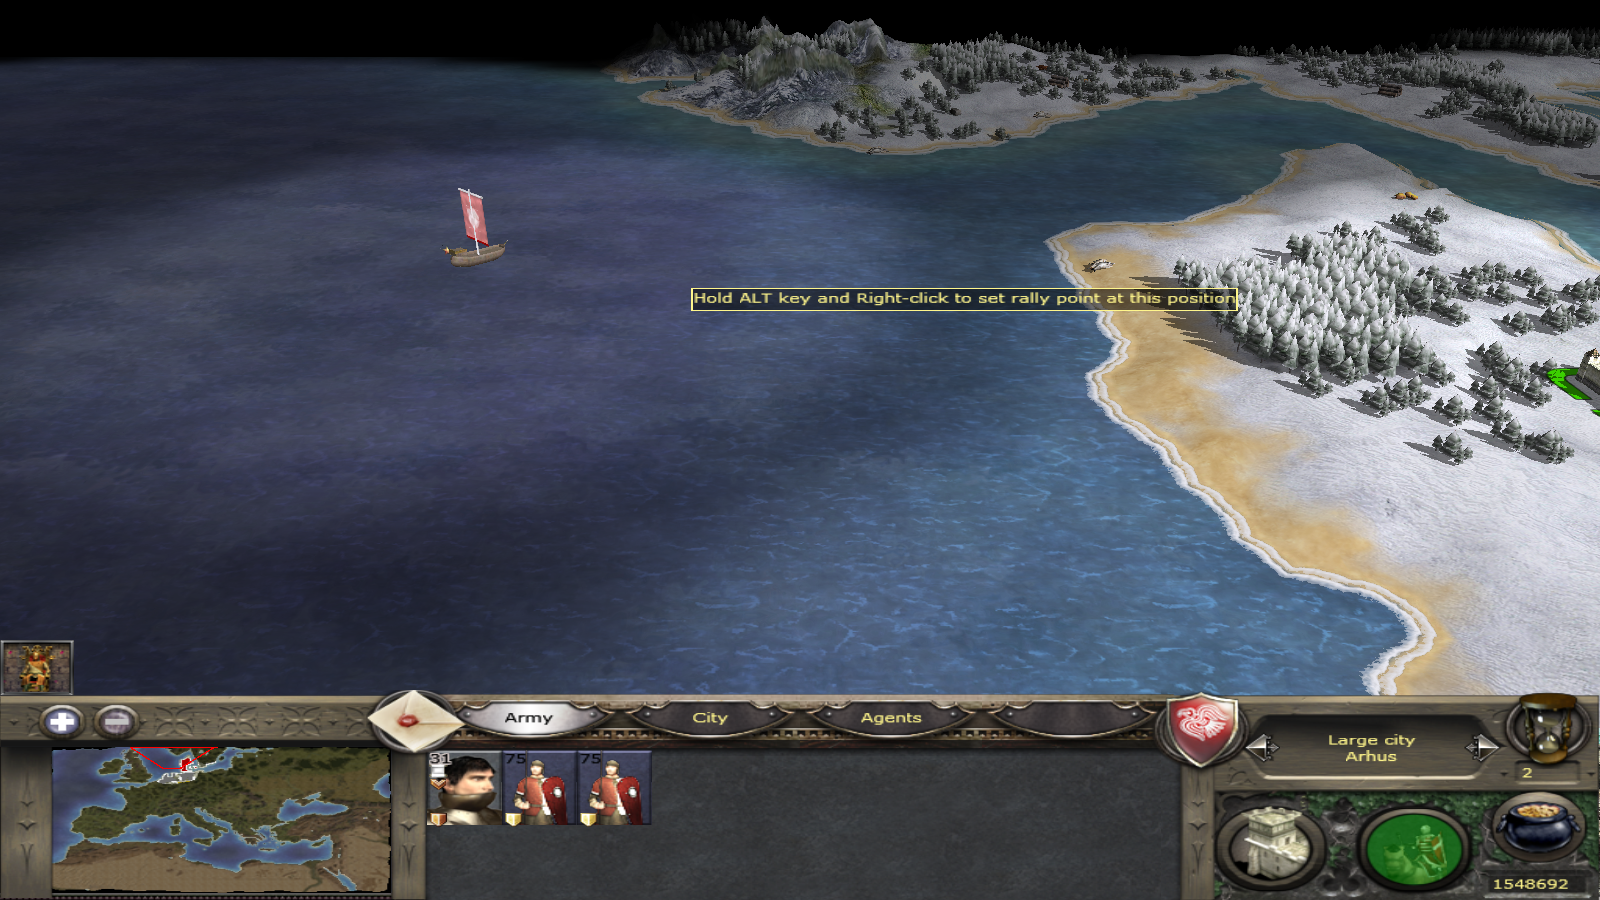 The Danish are even extending their might to sea! Beware, peasant villages!